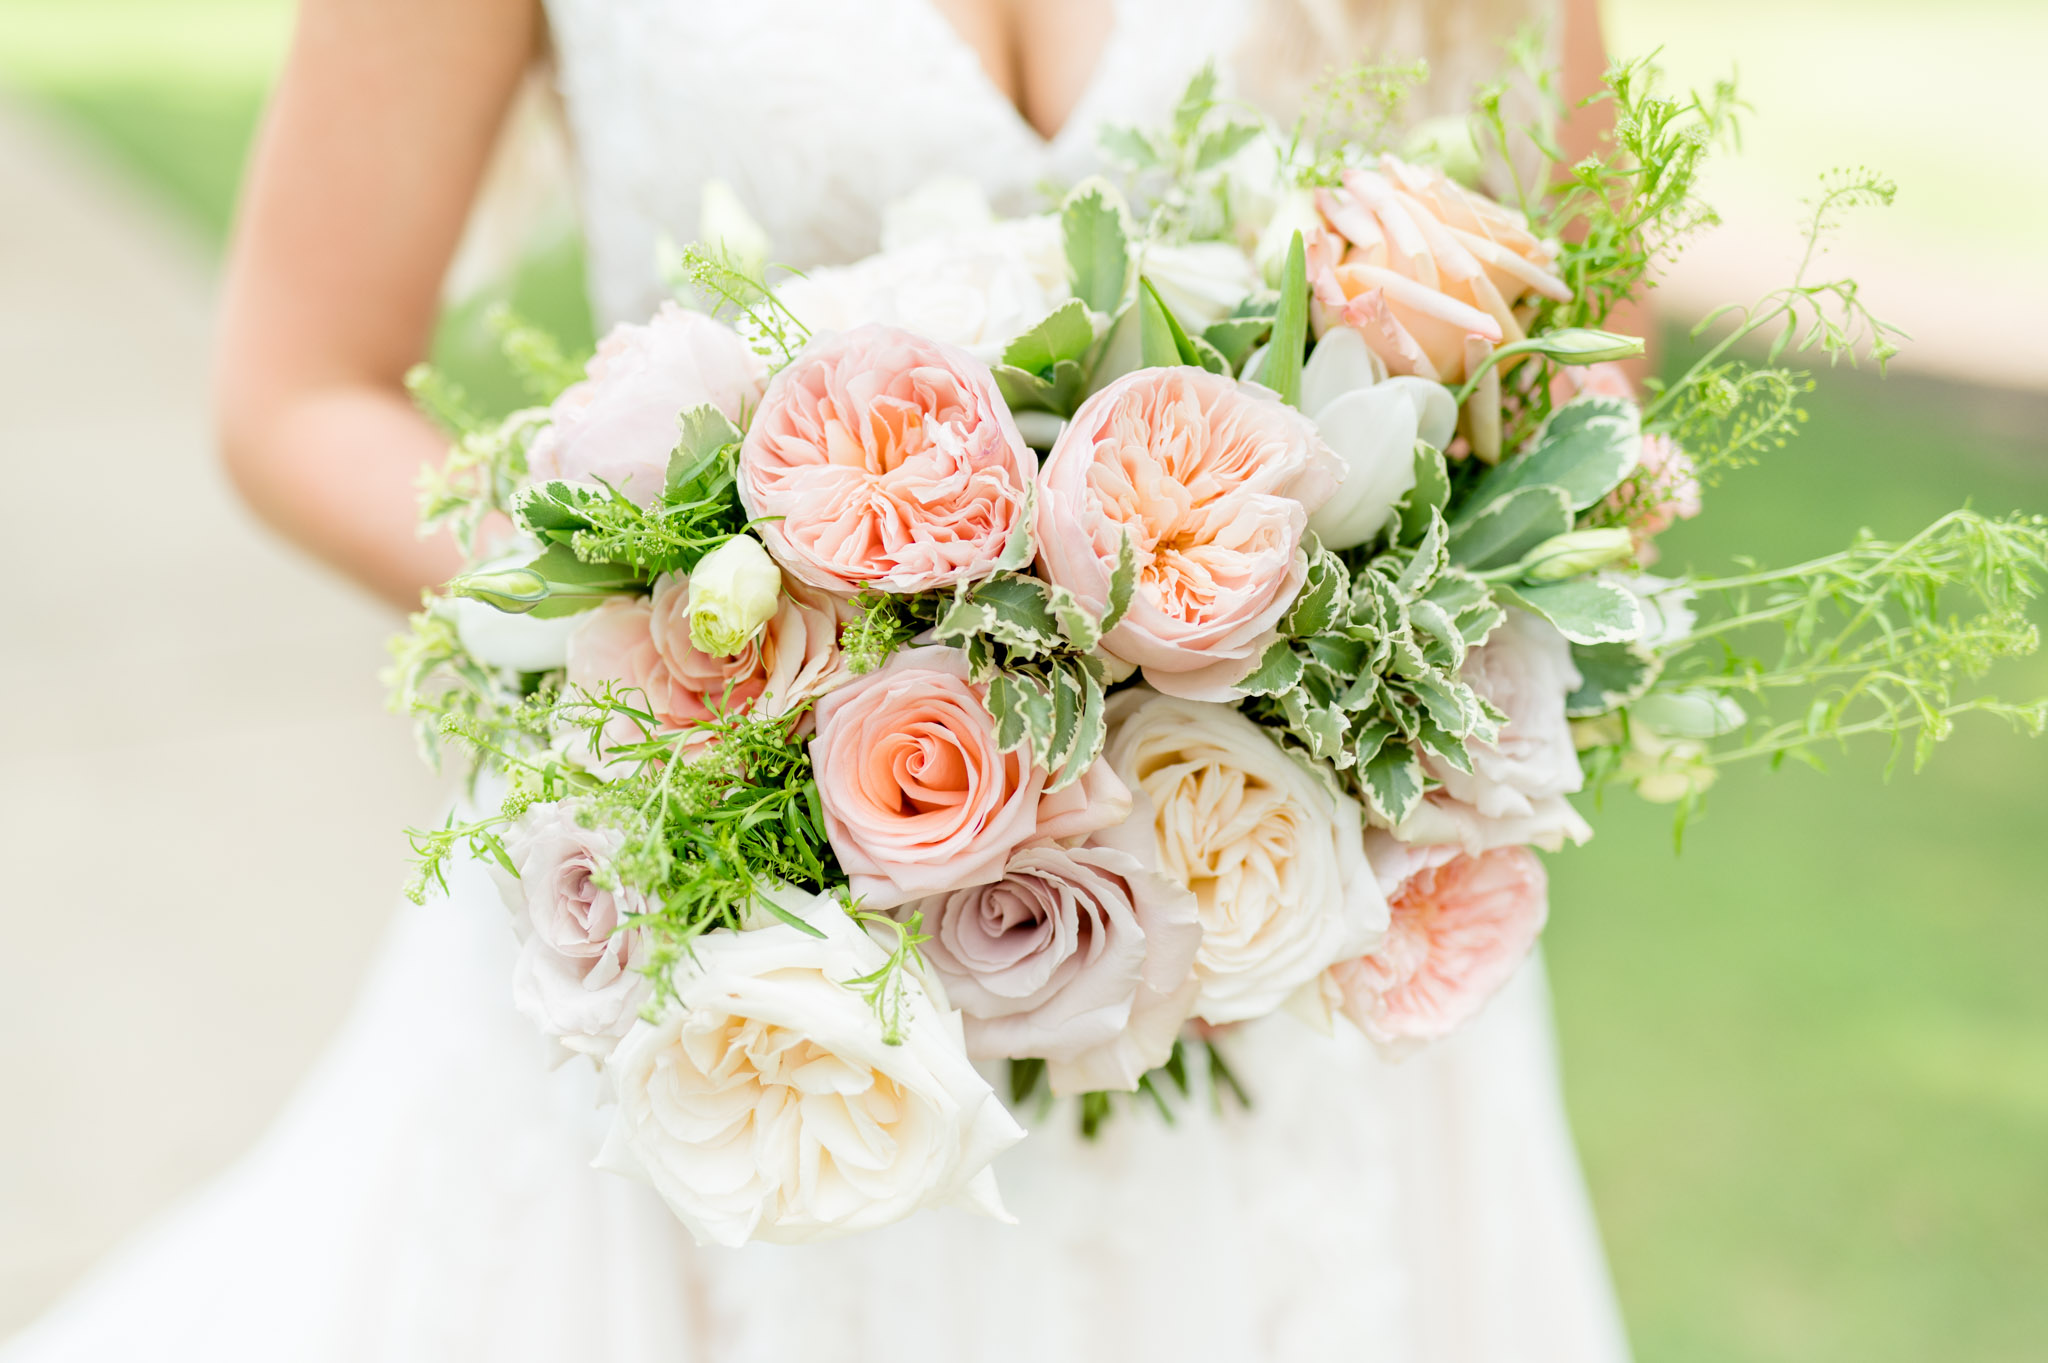 Blush and white flowers held by bride.